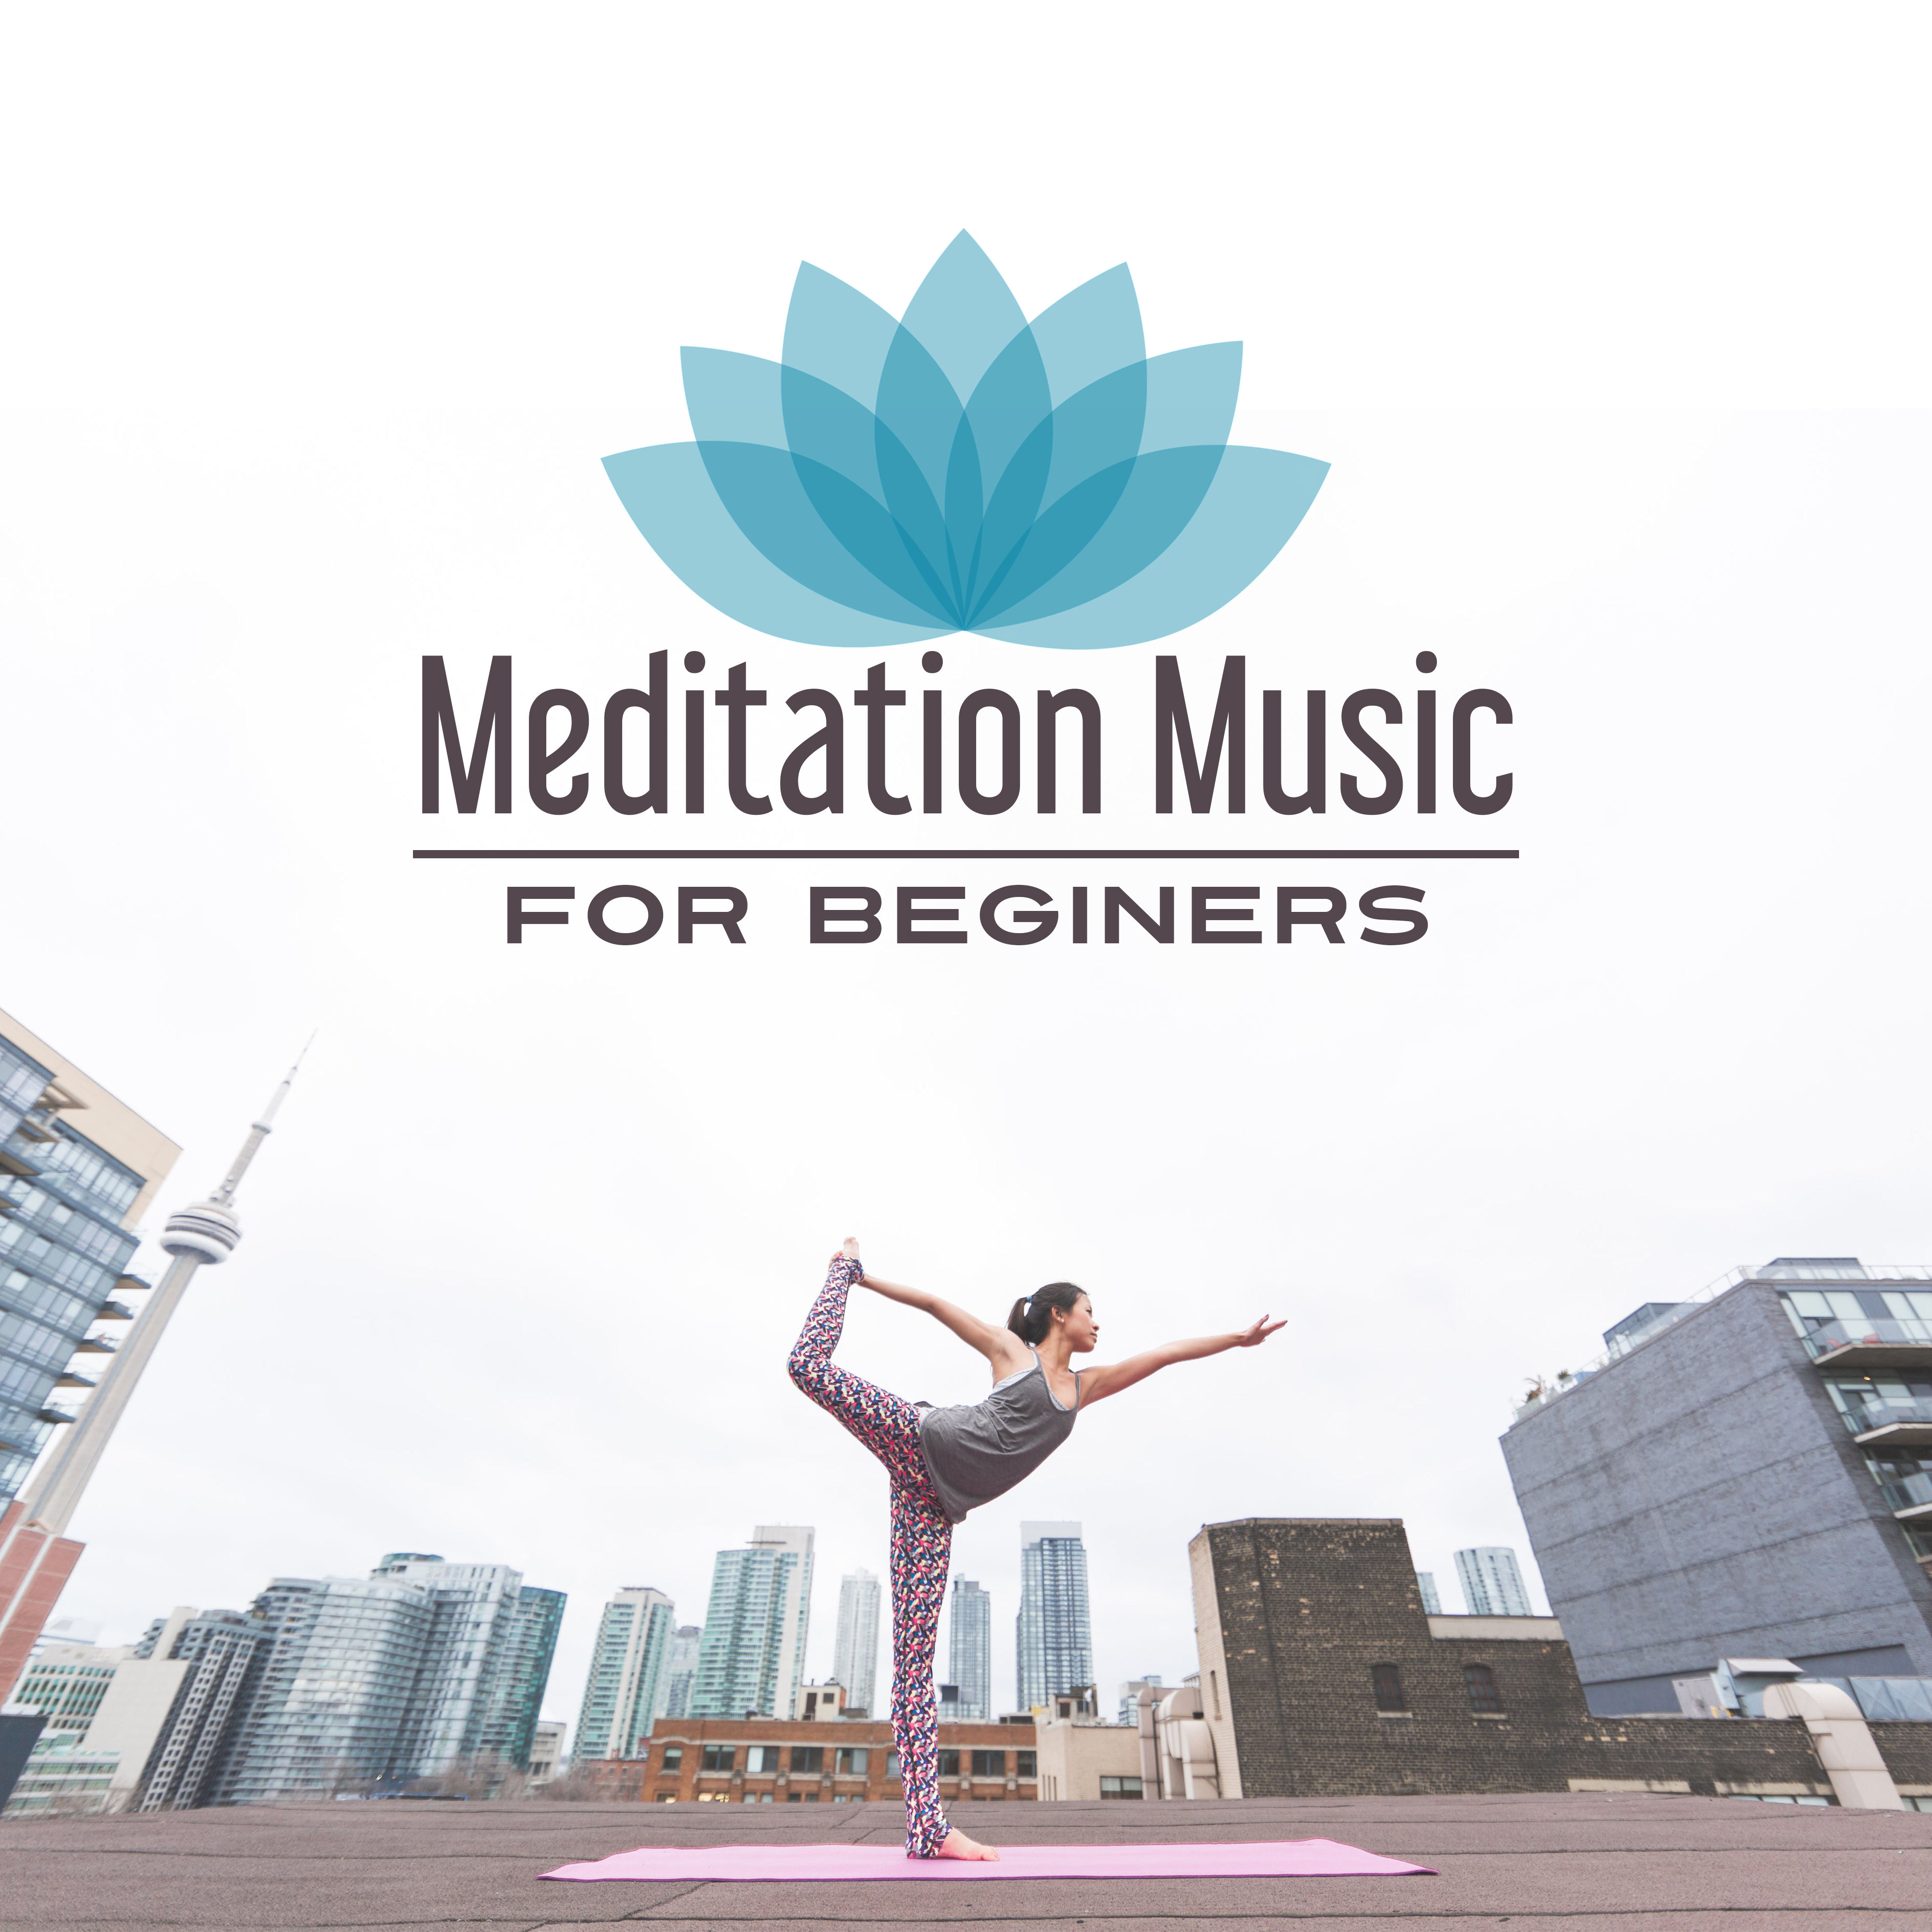 Meditation Music for Beginers – Peaceful New Age, Music for Meditation, Yoga, Pilates, Be Mindful